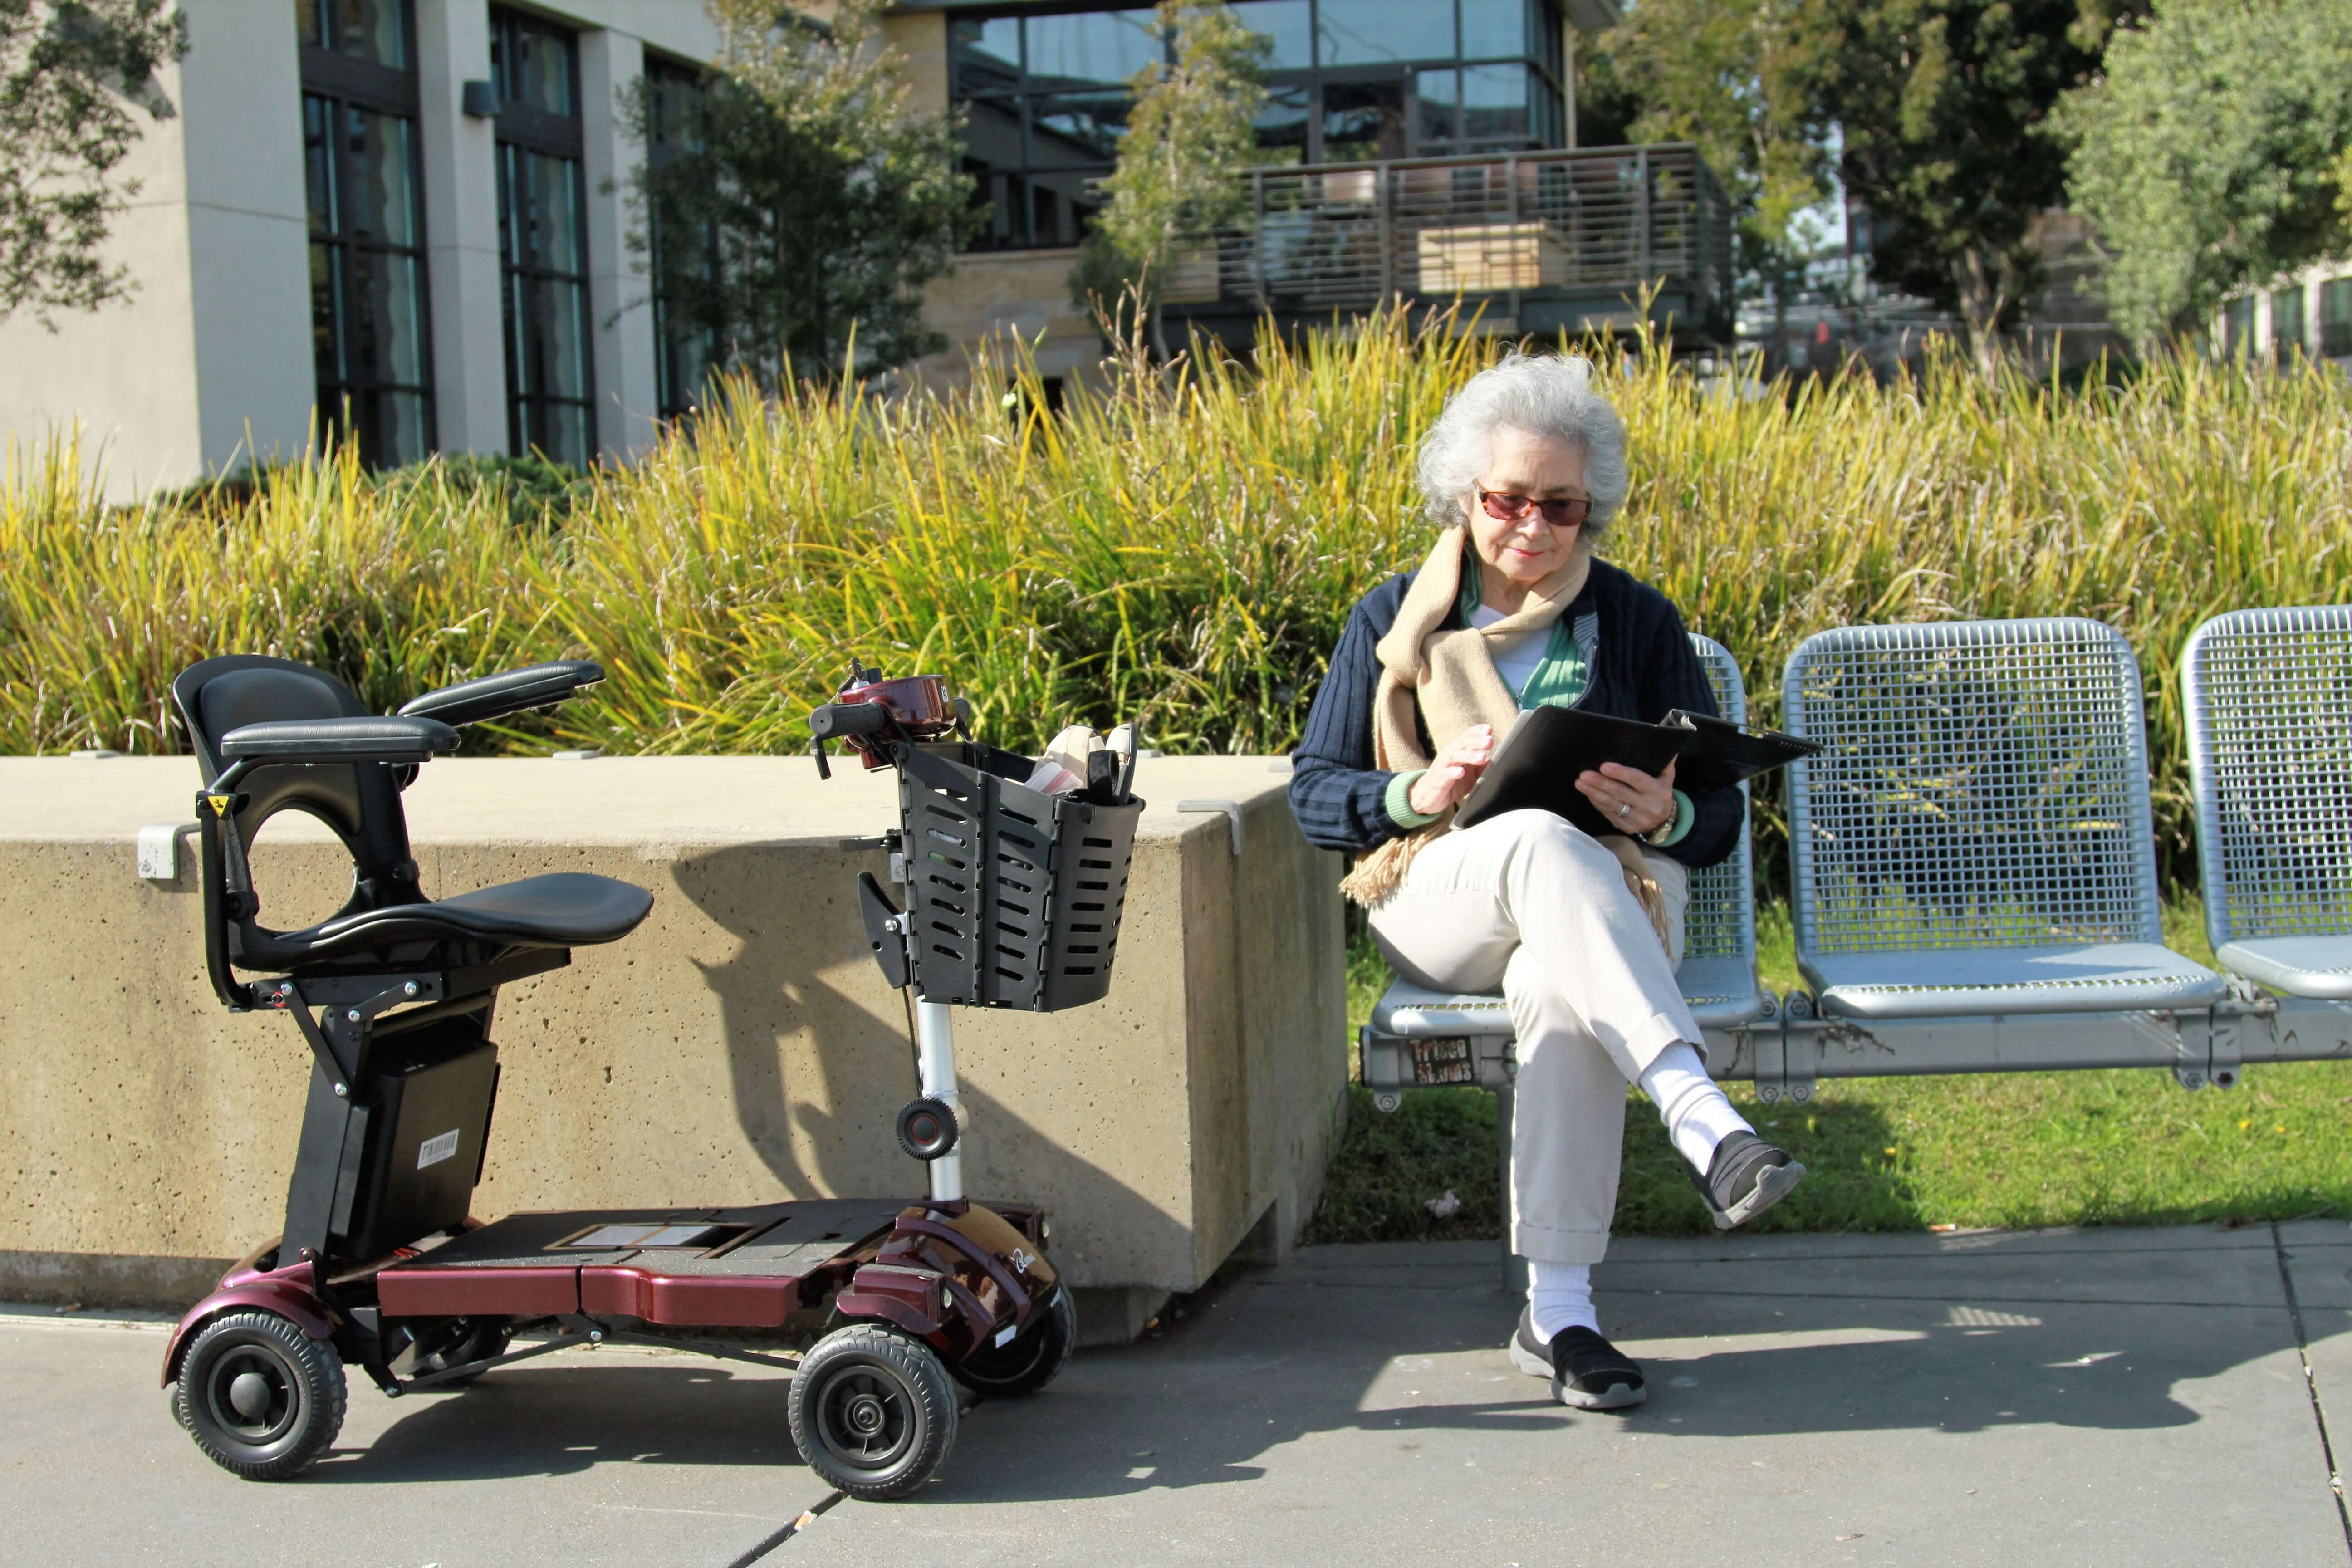 A woman relaxing next to her mobility scooter, reading a book on a park bench